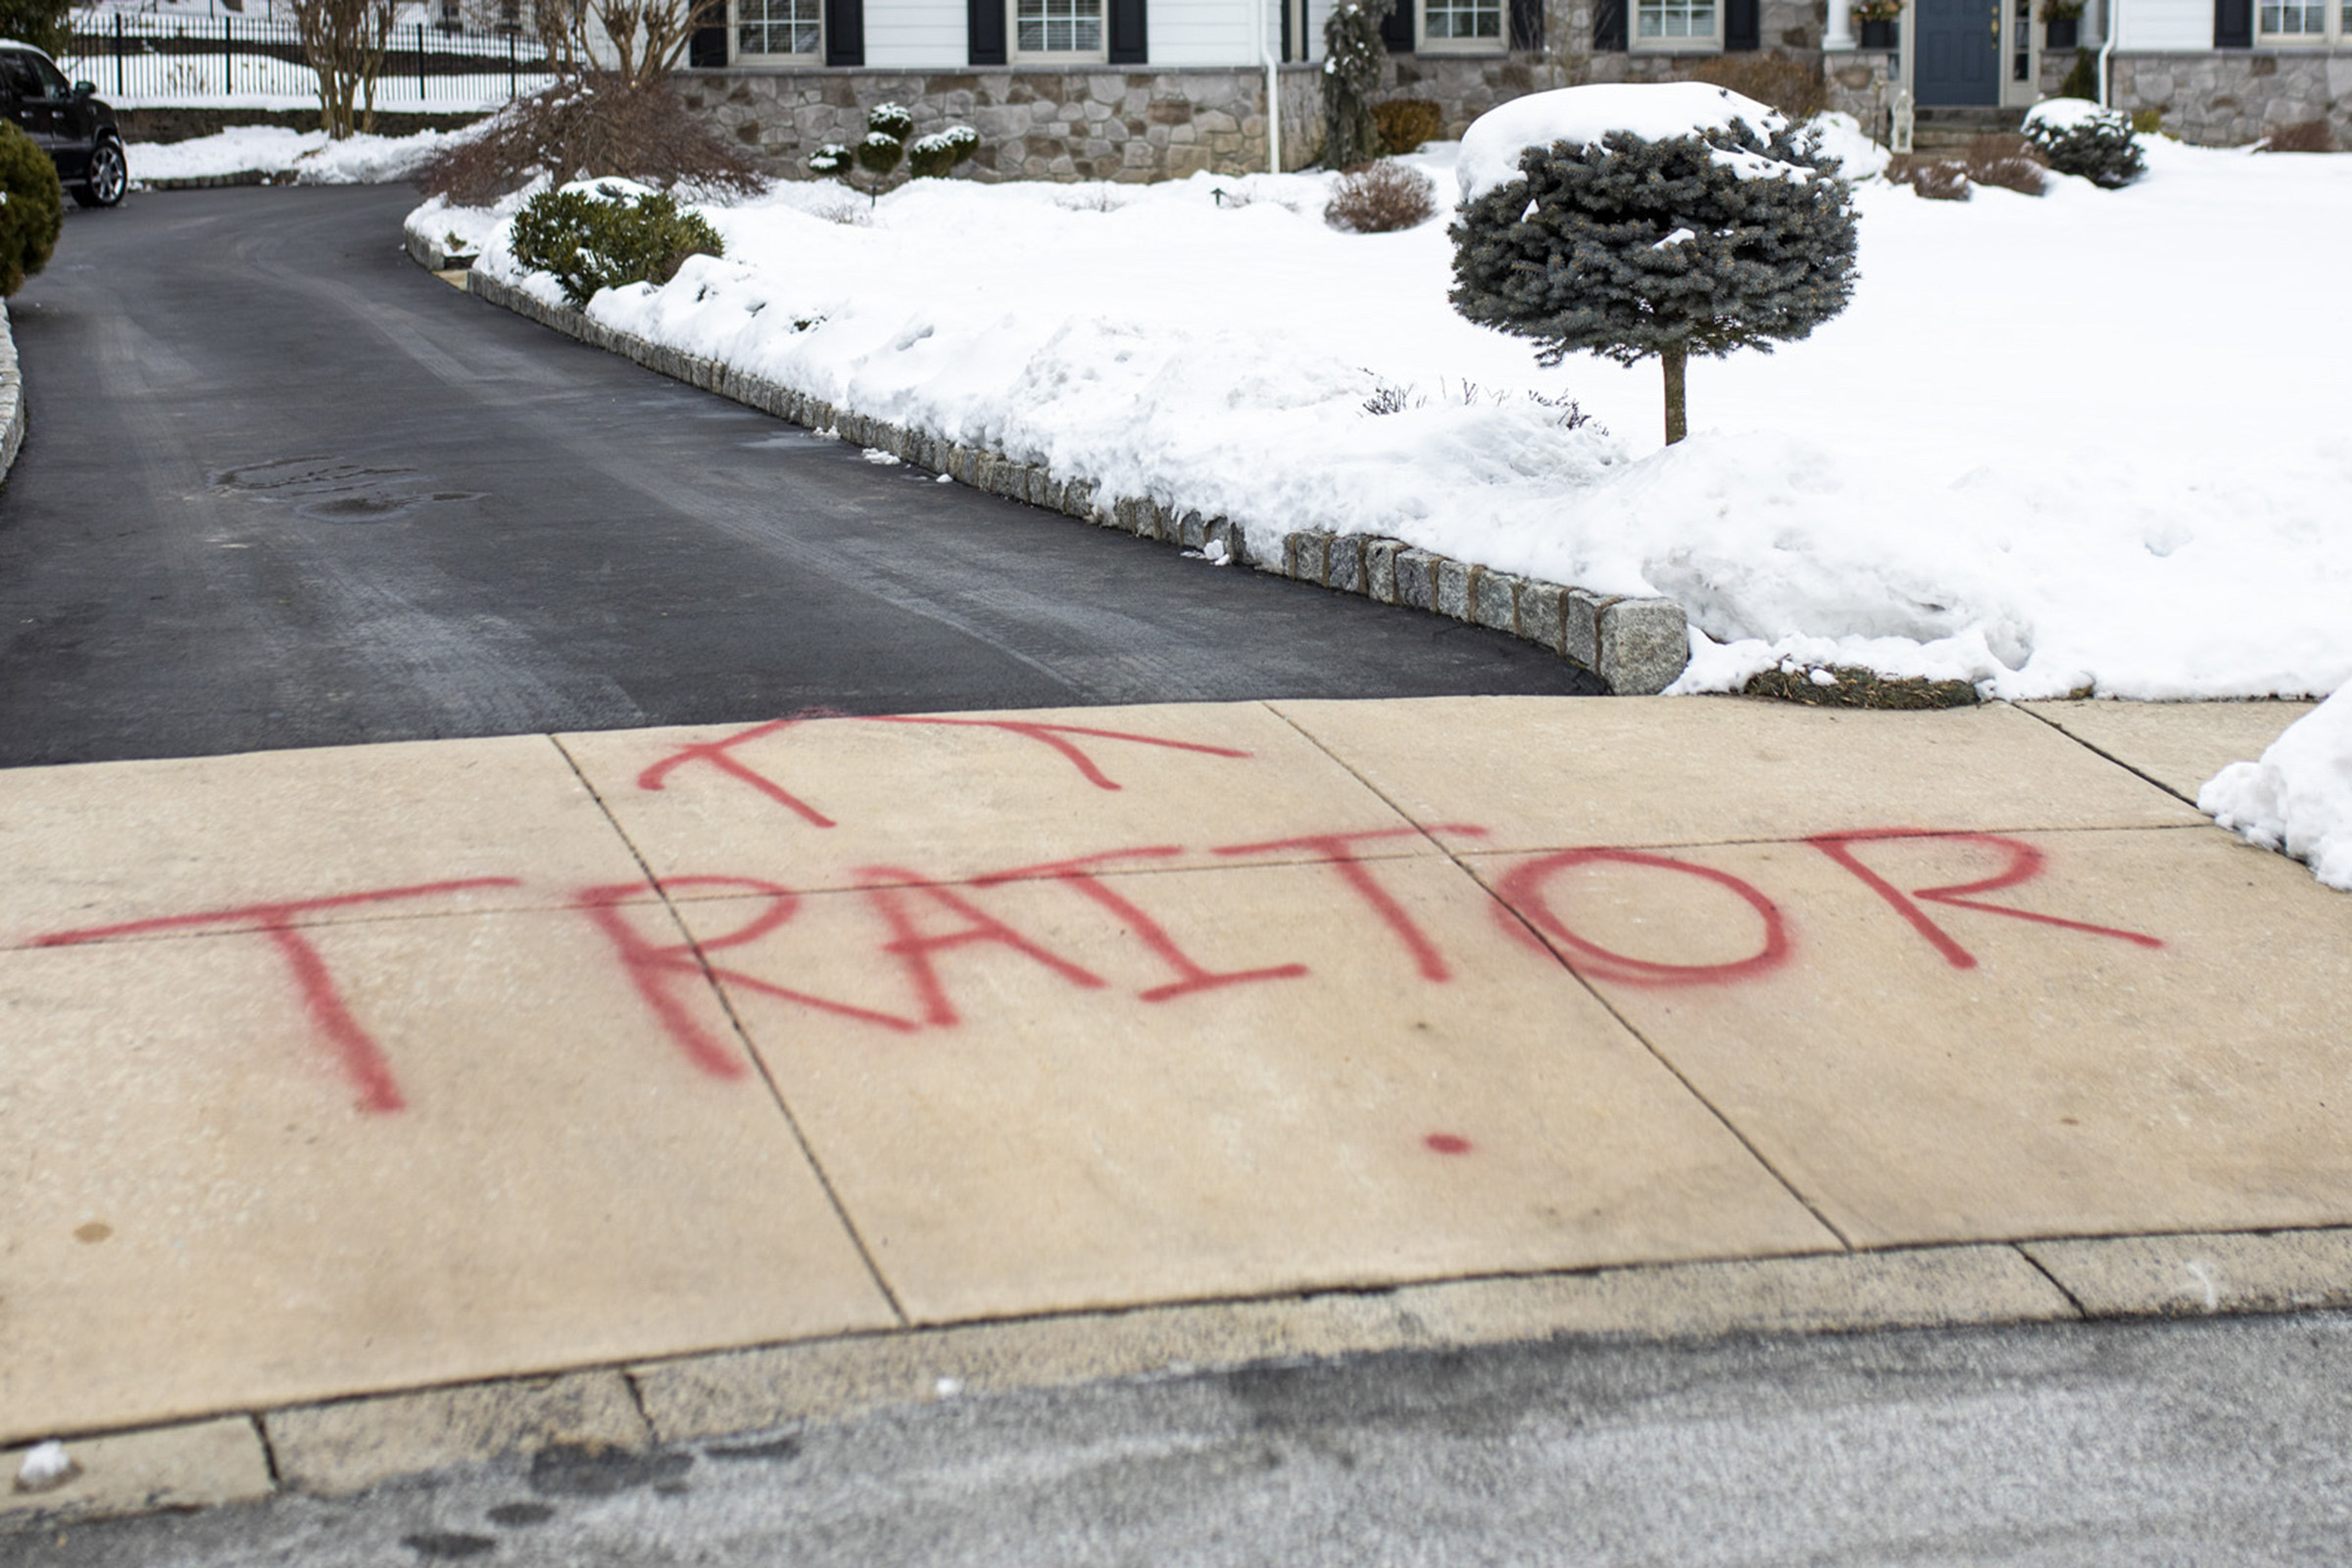 PHOTO: Graffiti is spray painted on the driveway outside of attorney Michael van der Veen's suburban Philadelphia home, Feb. 13, 2021.